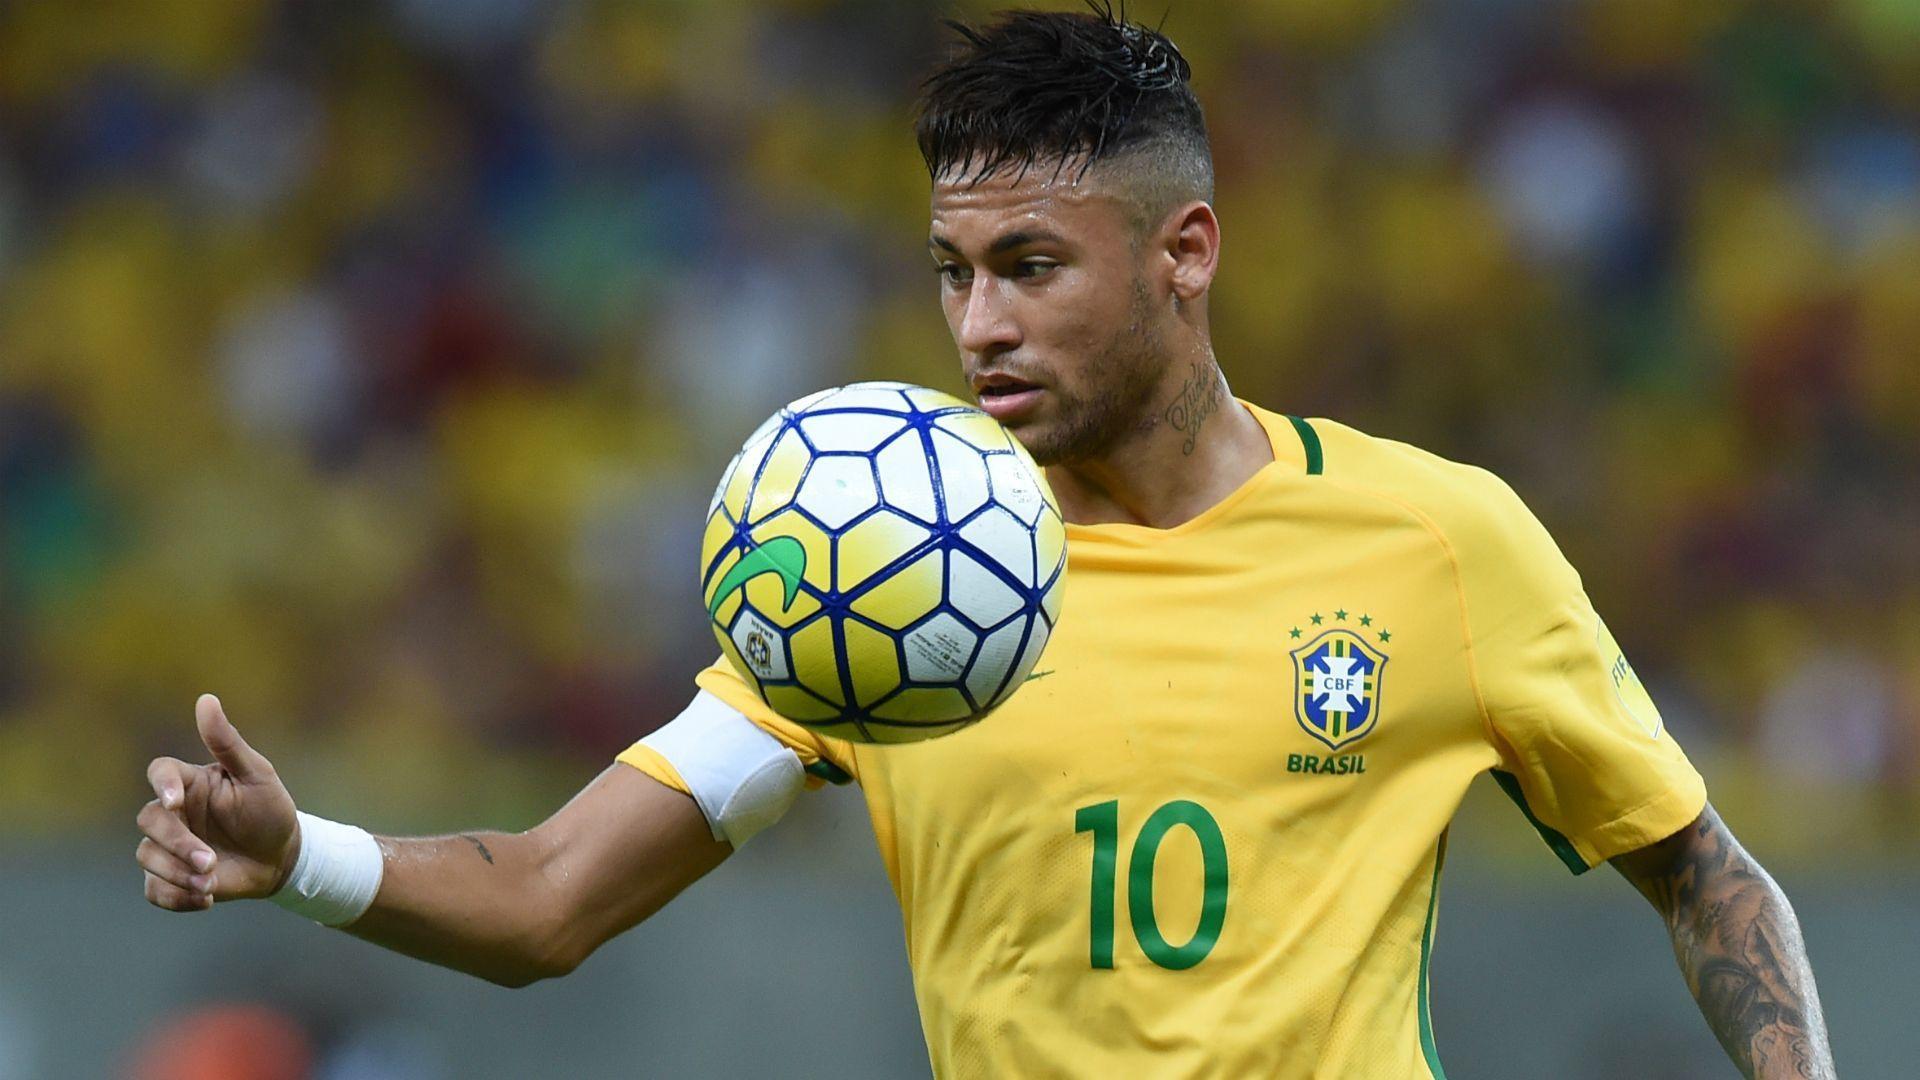 Neymar to play for Brazil at Olympic Games in Rio. Soccer